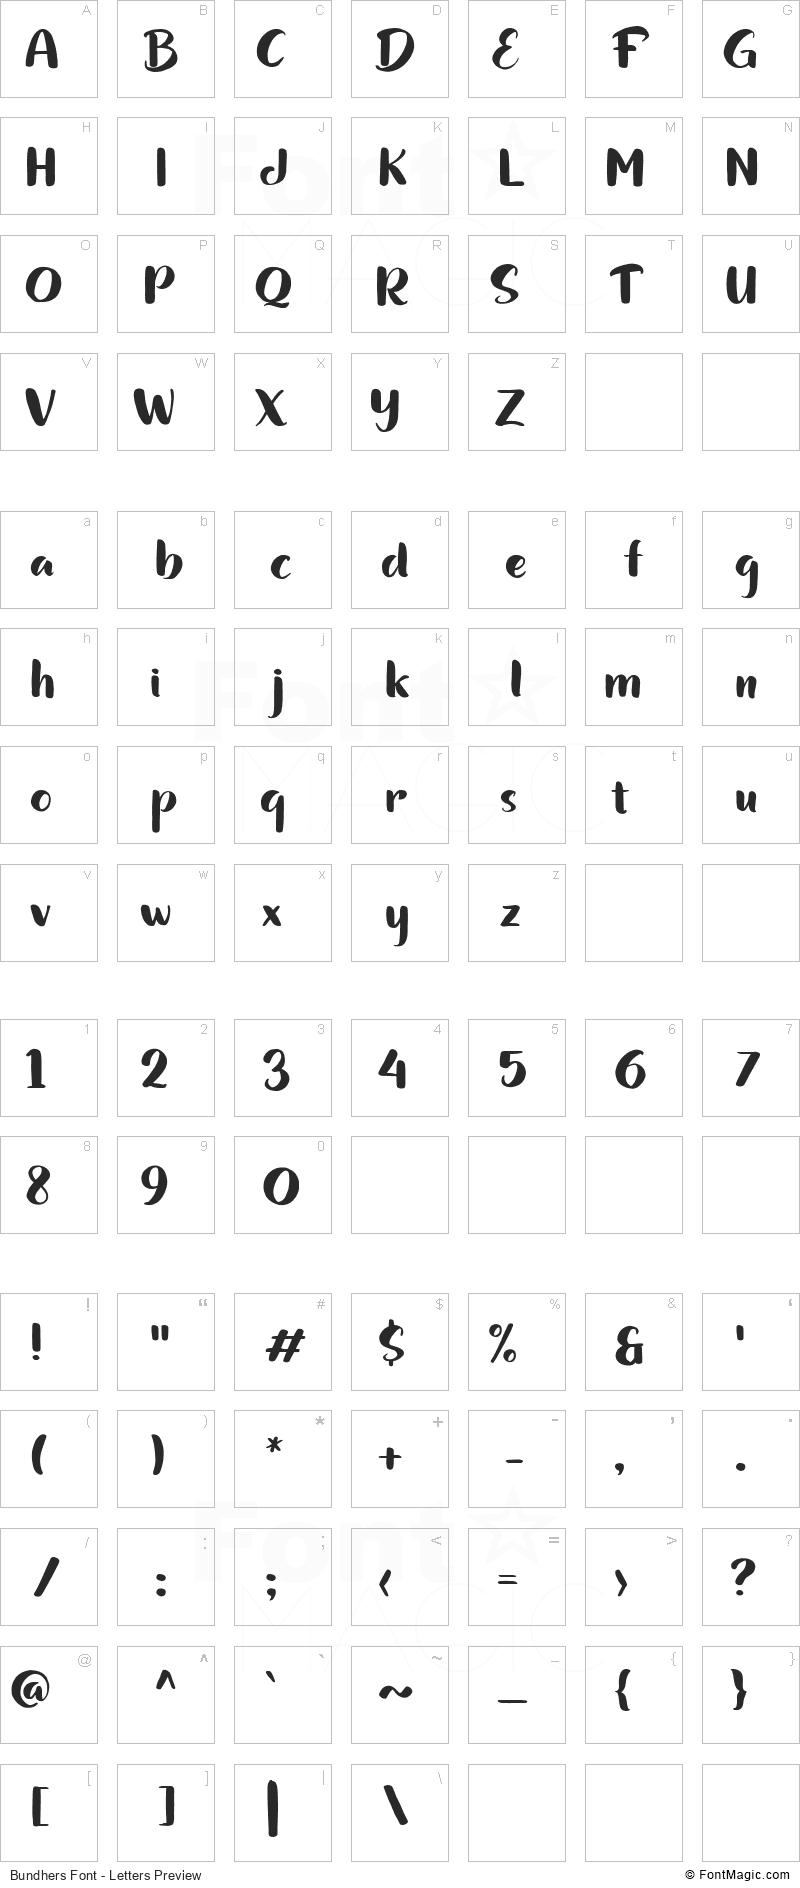 Bundhers Font - All Latters Preview Chart